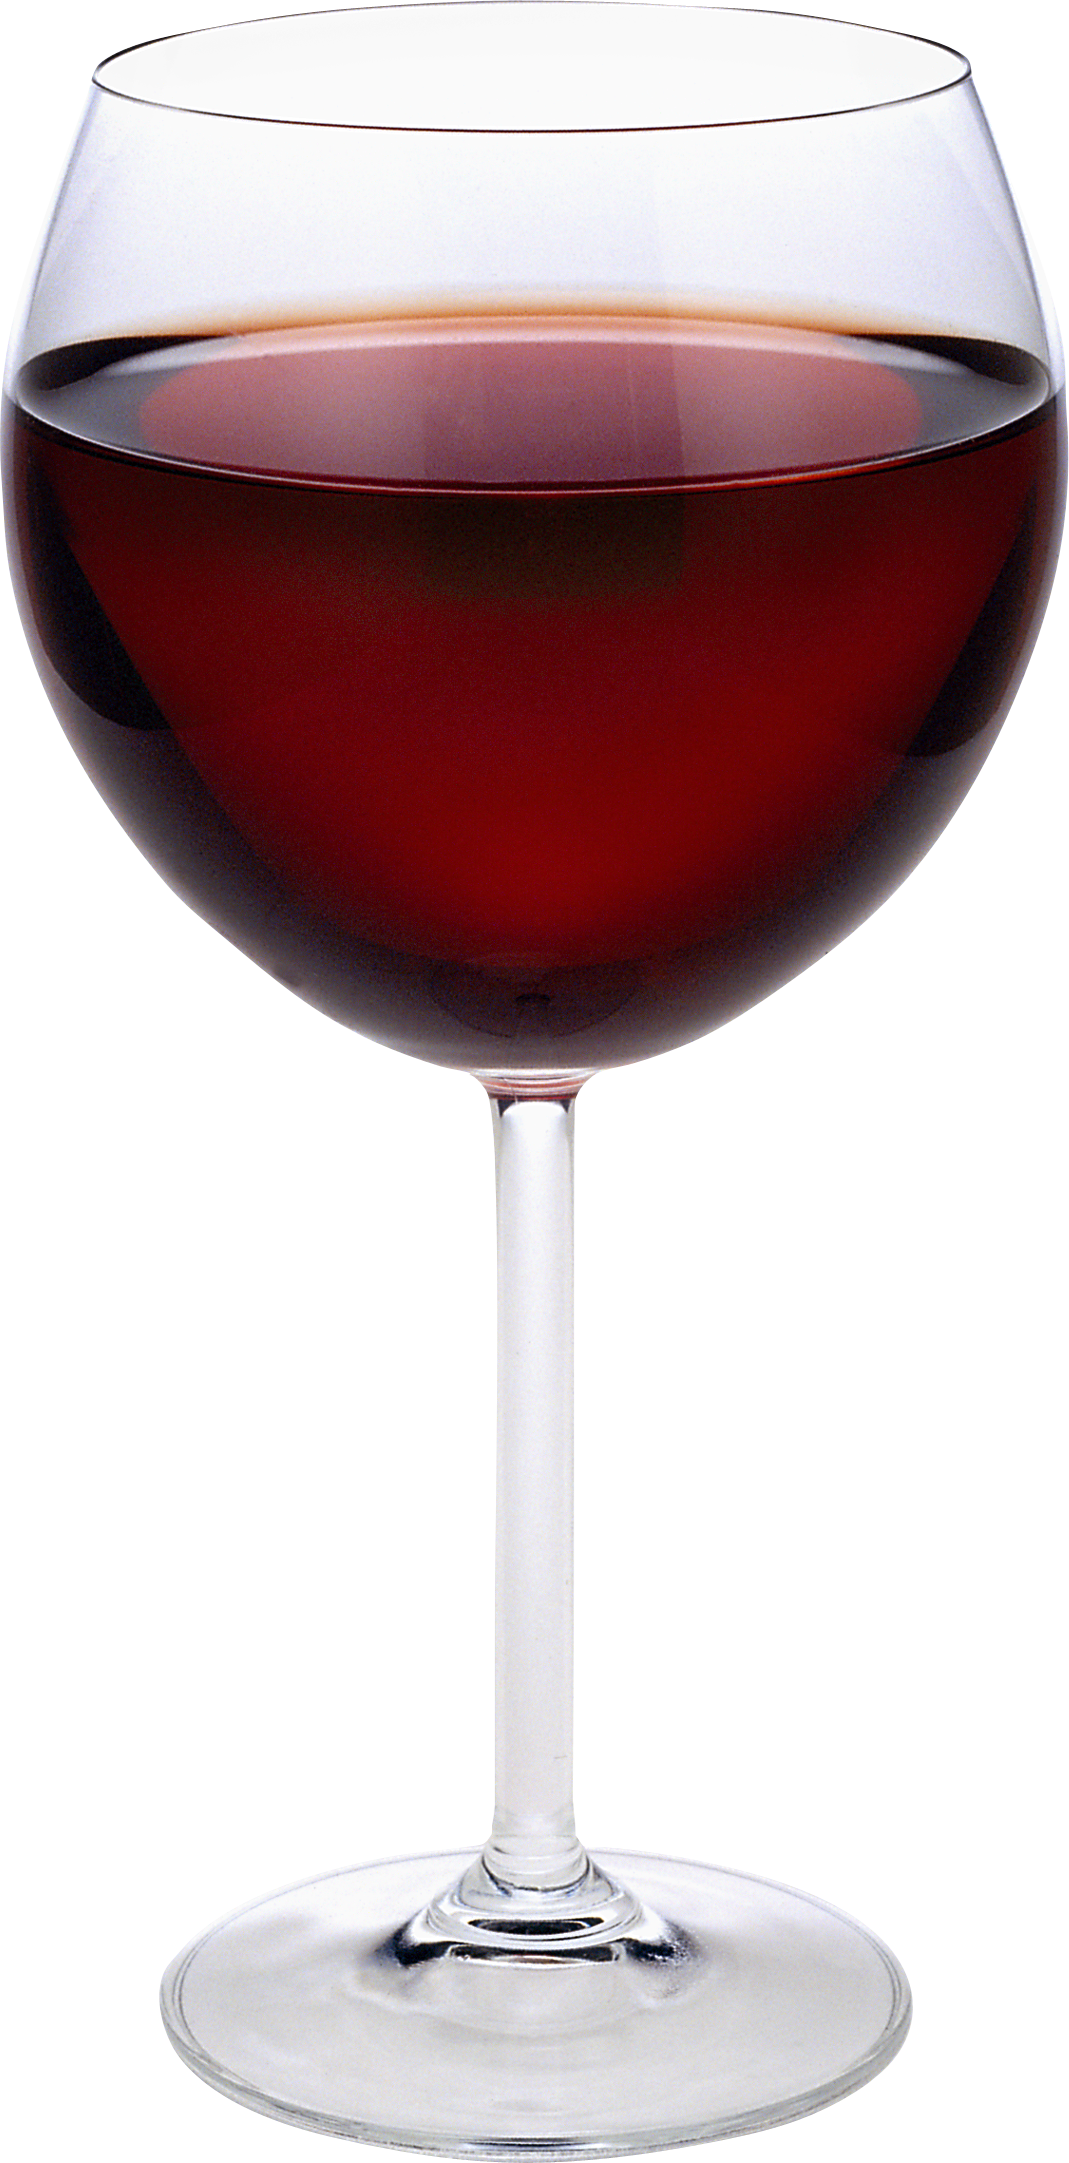 Wine Glass Png Image - Wine Glass, Transparent background PNG HD thumbnail